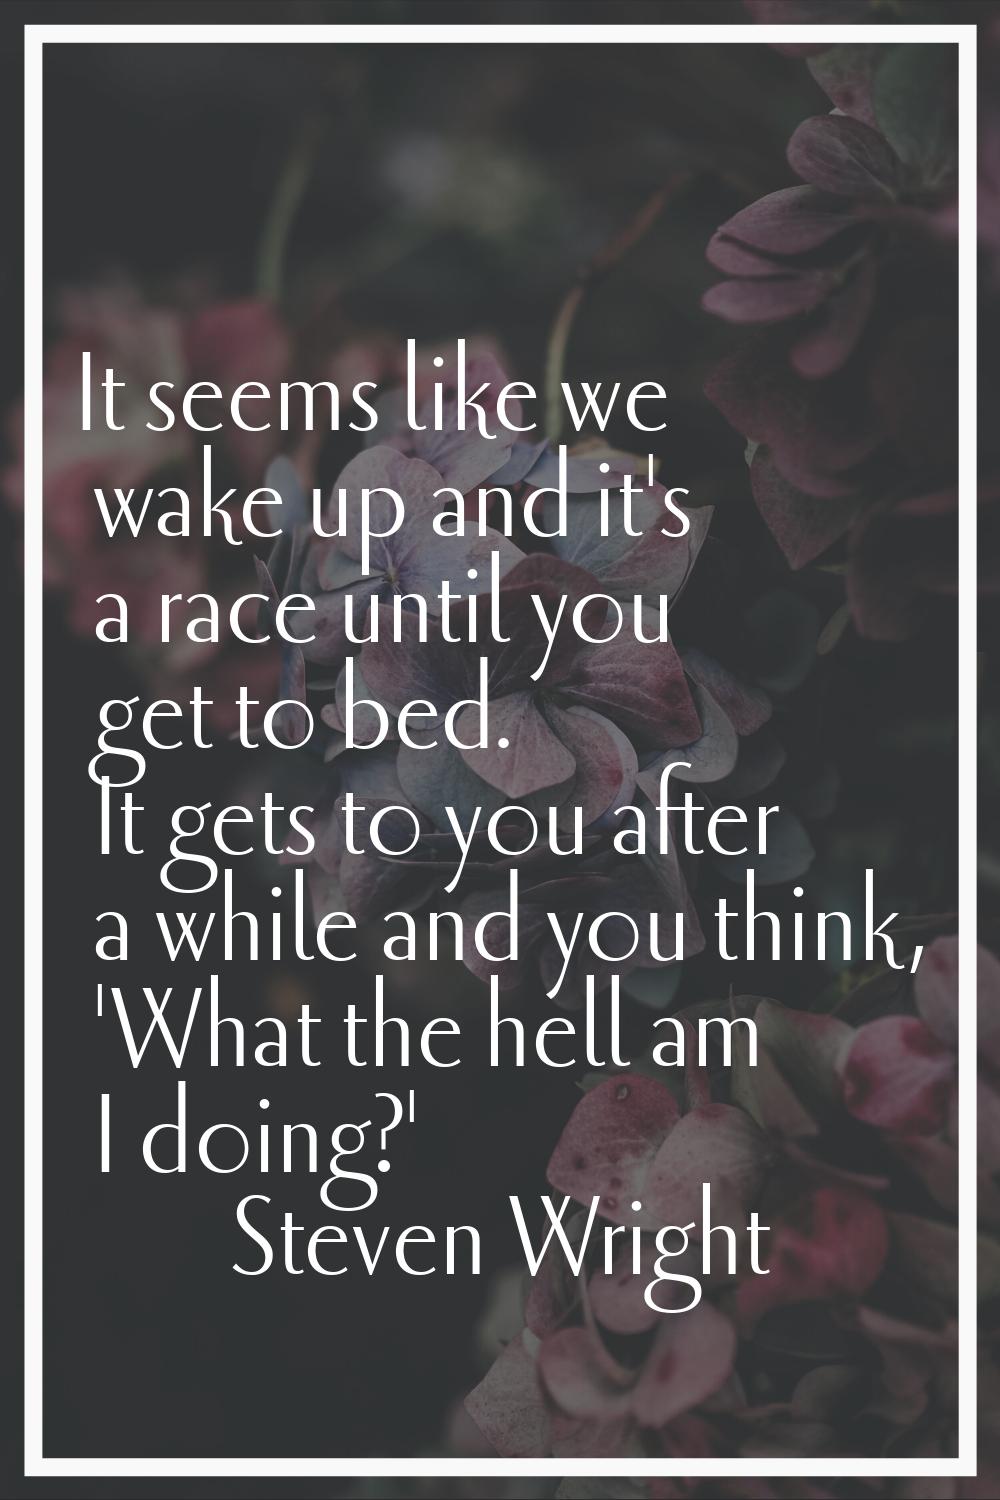 It seems like we wake up and it's a race until you get to bed. It gets to you after a while and you